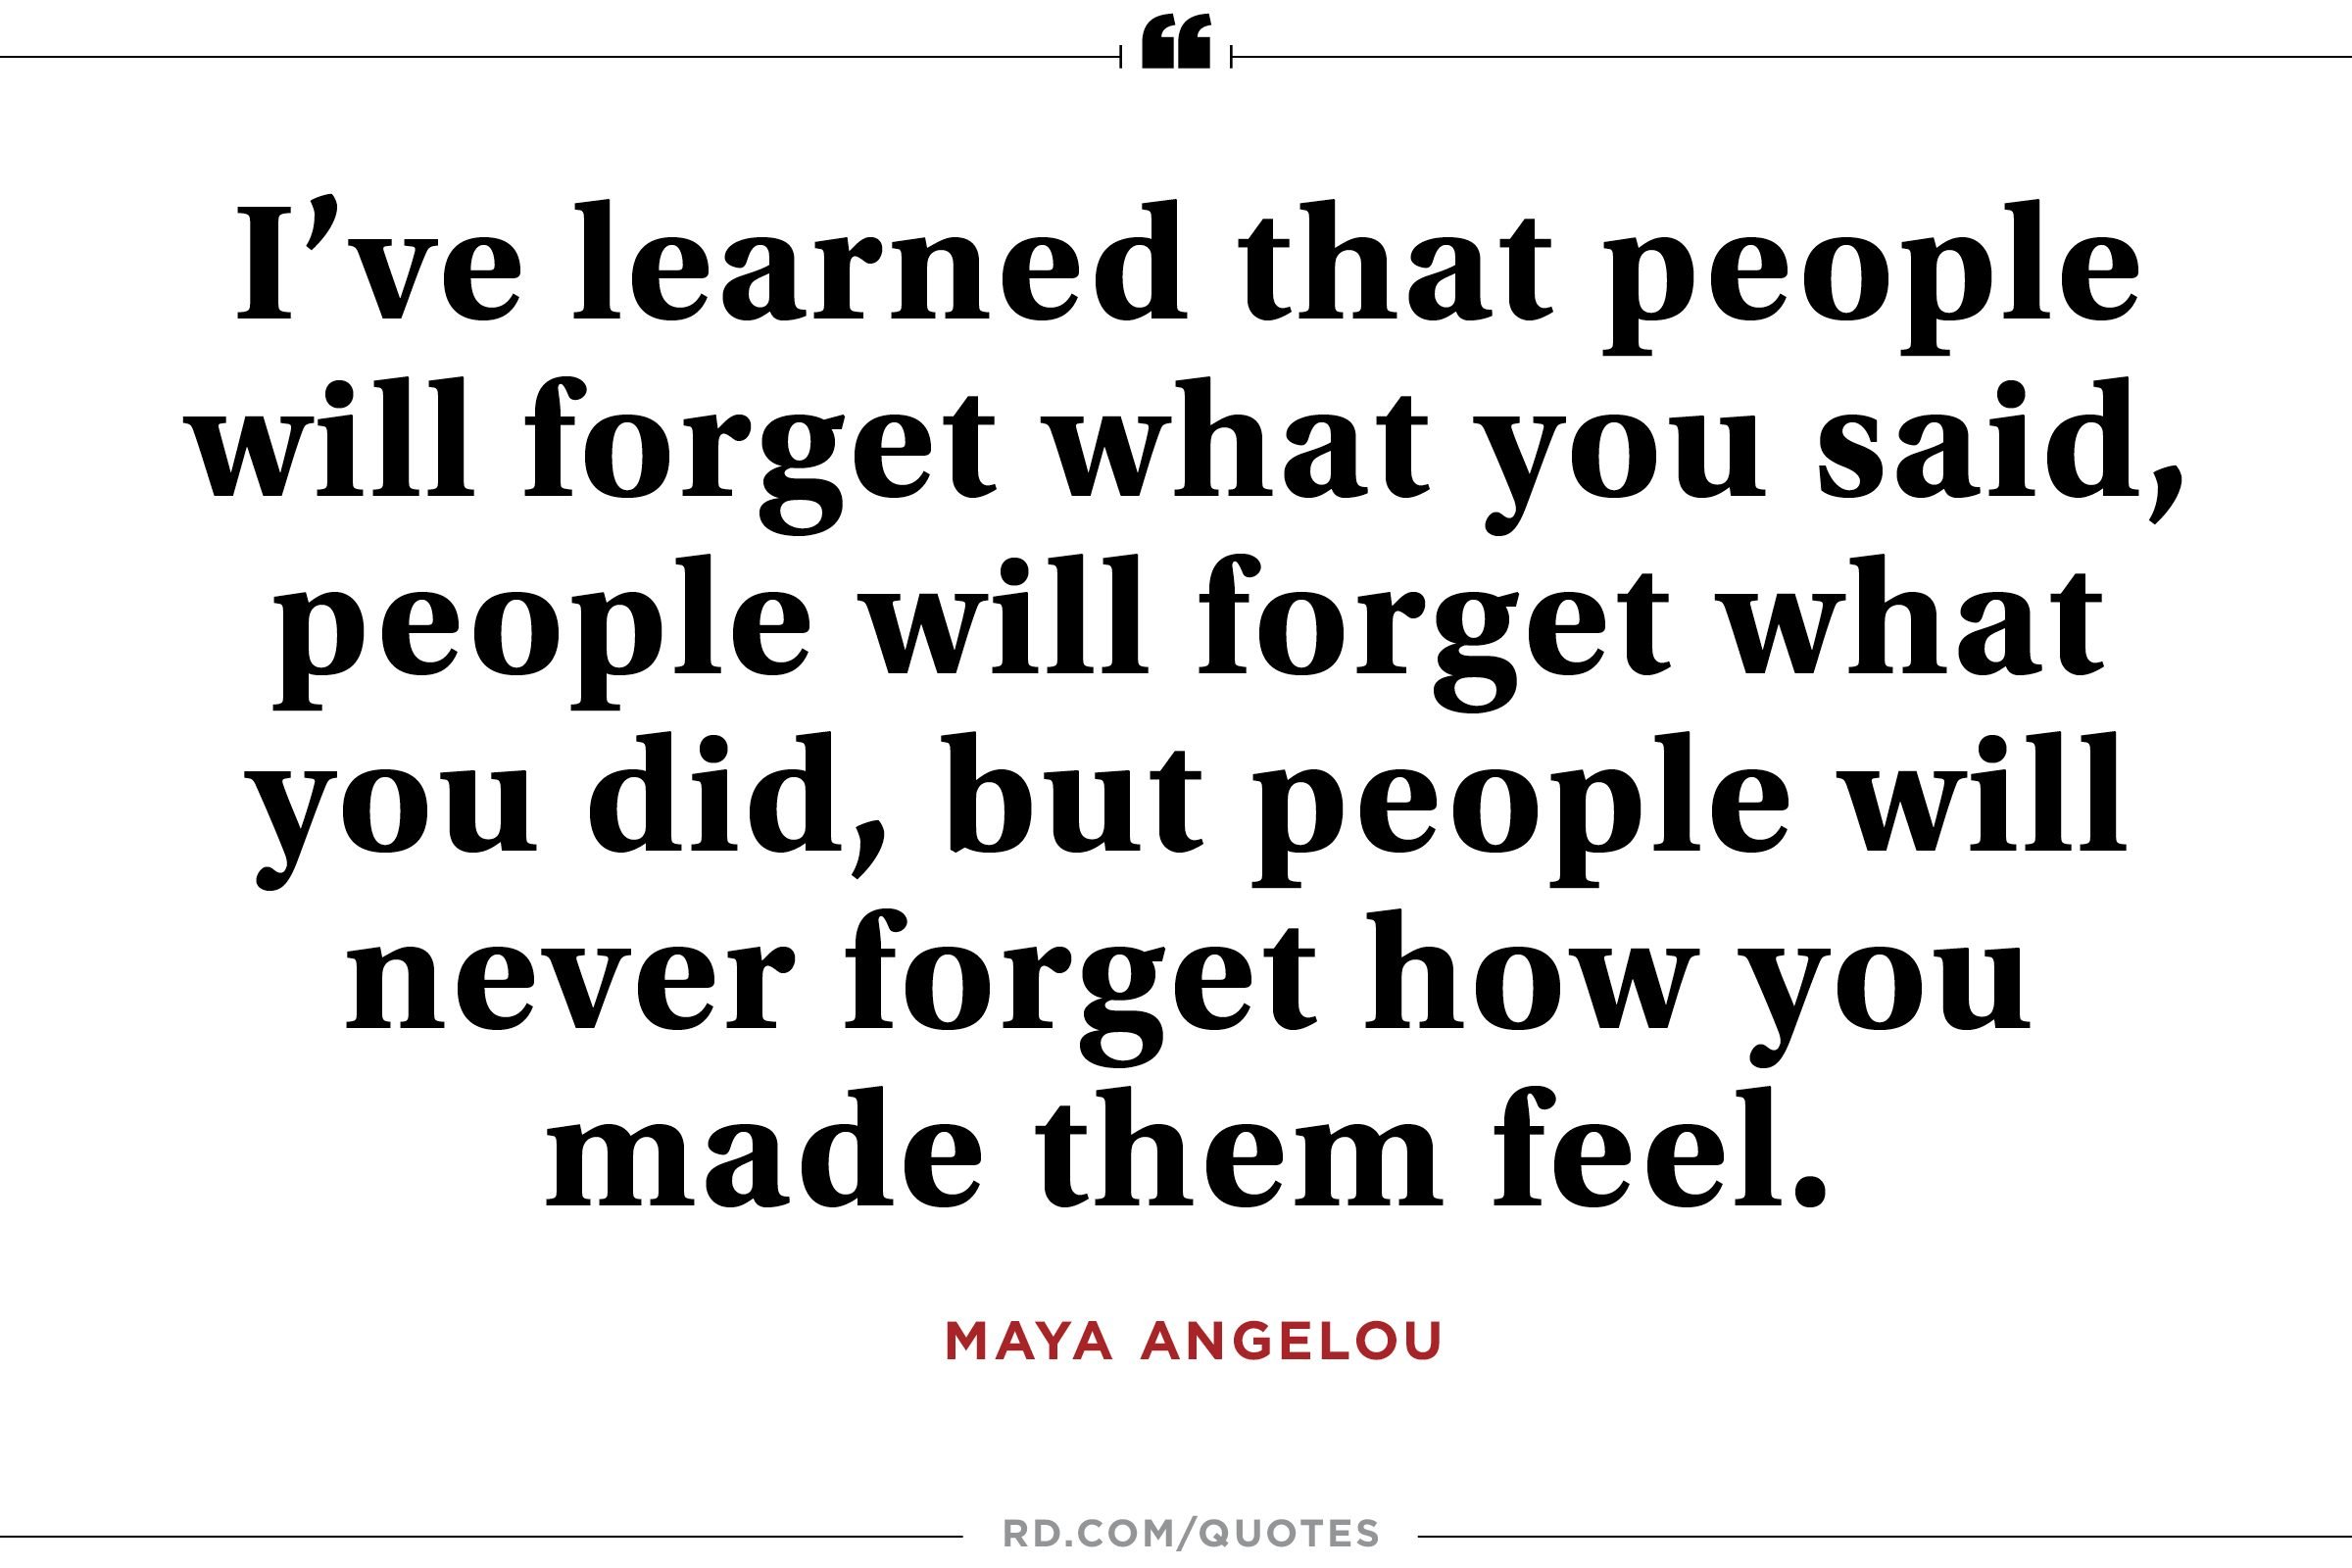 ive learned that Maya Angelou Quotes